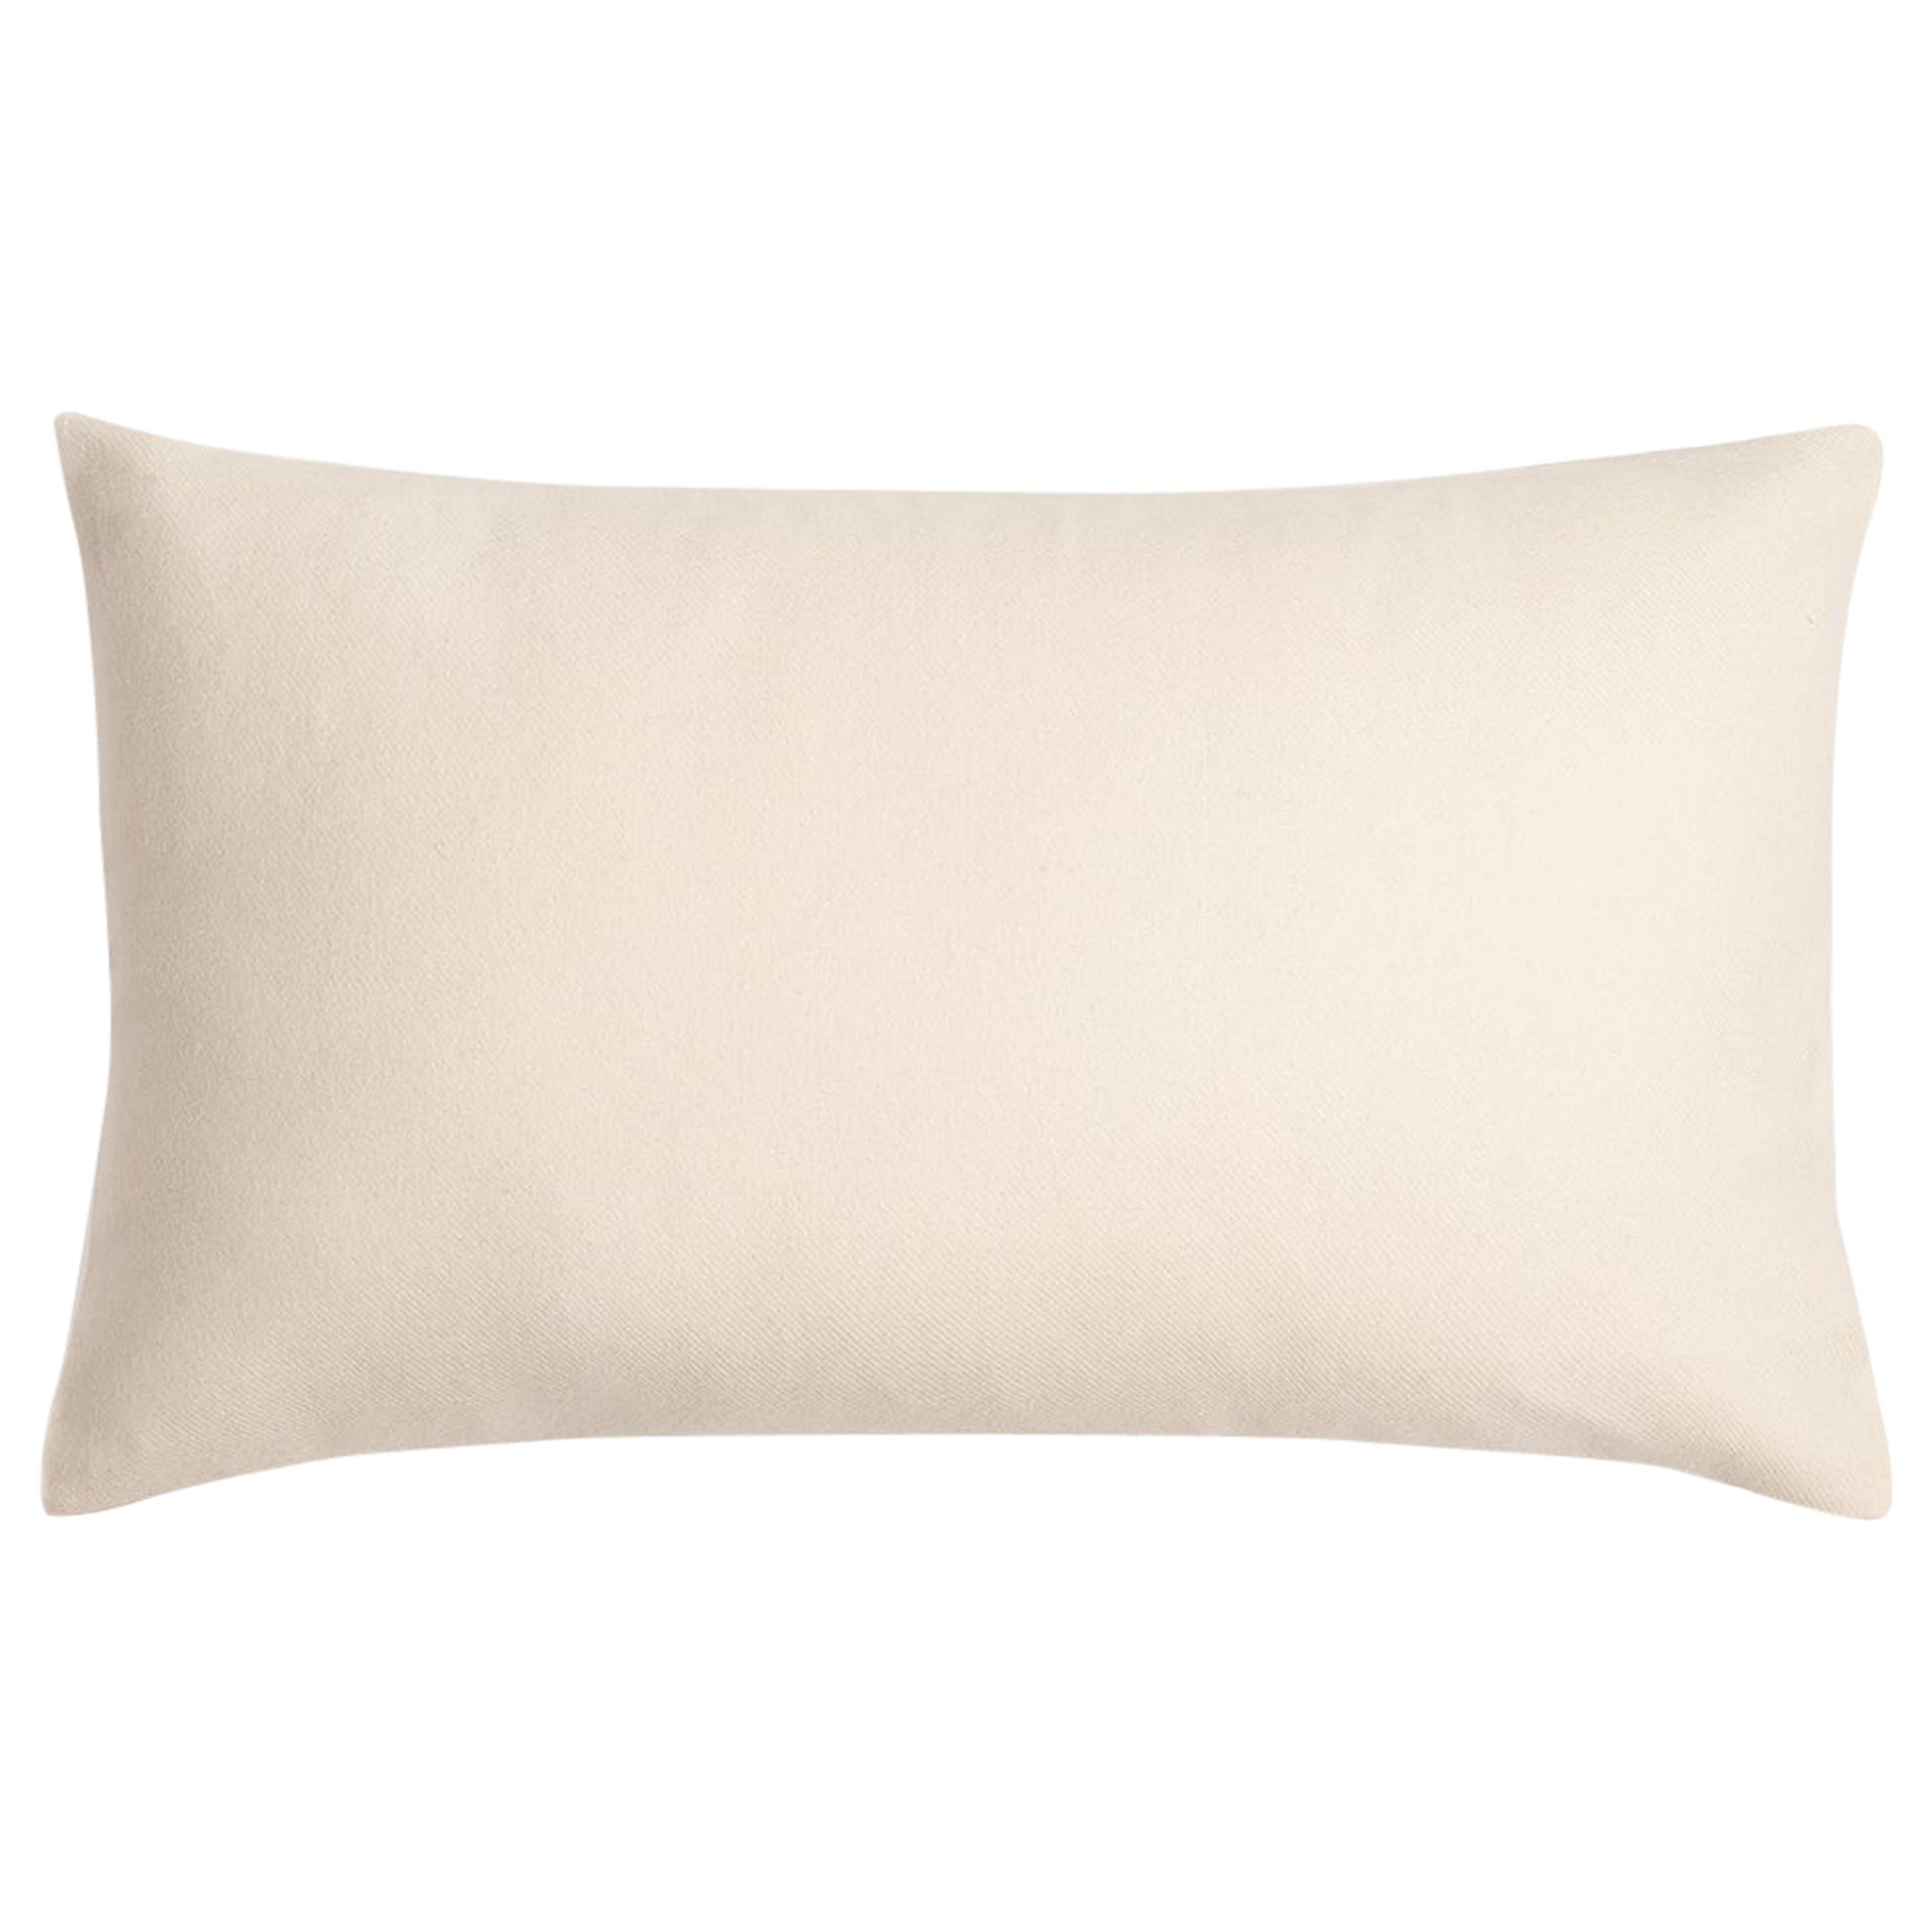 Ben Soleimani Cashmere Pillow Cover - Ivory 13"x21" For Sale